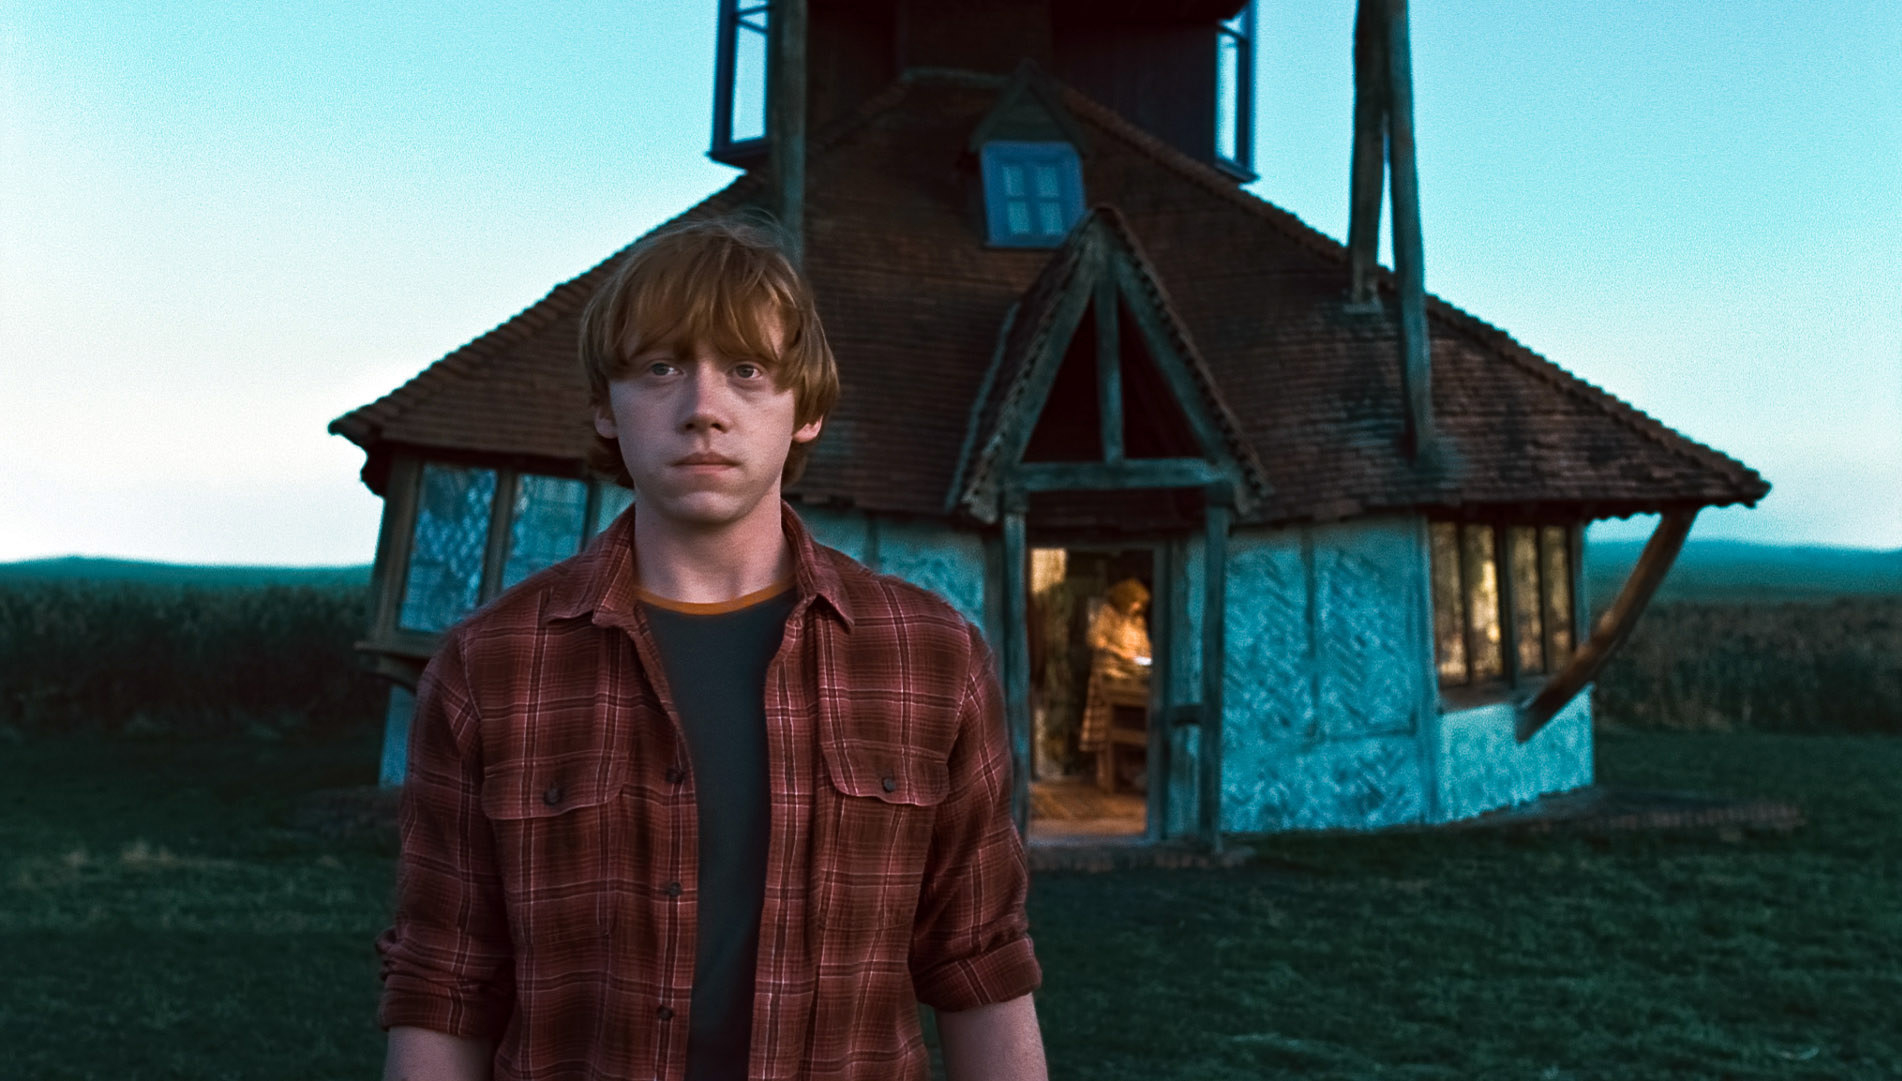 Grint as Ron Weasley